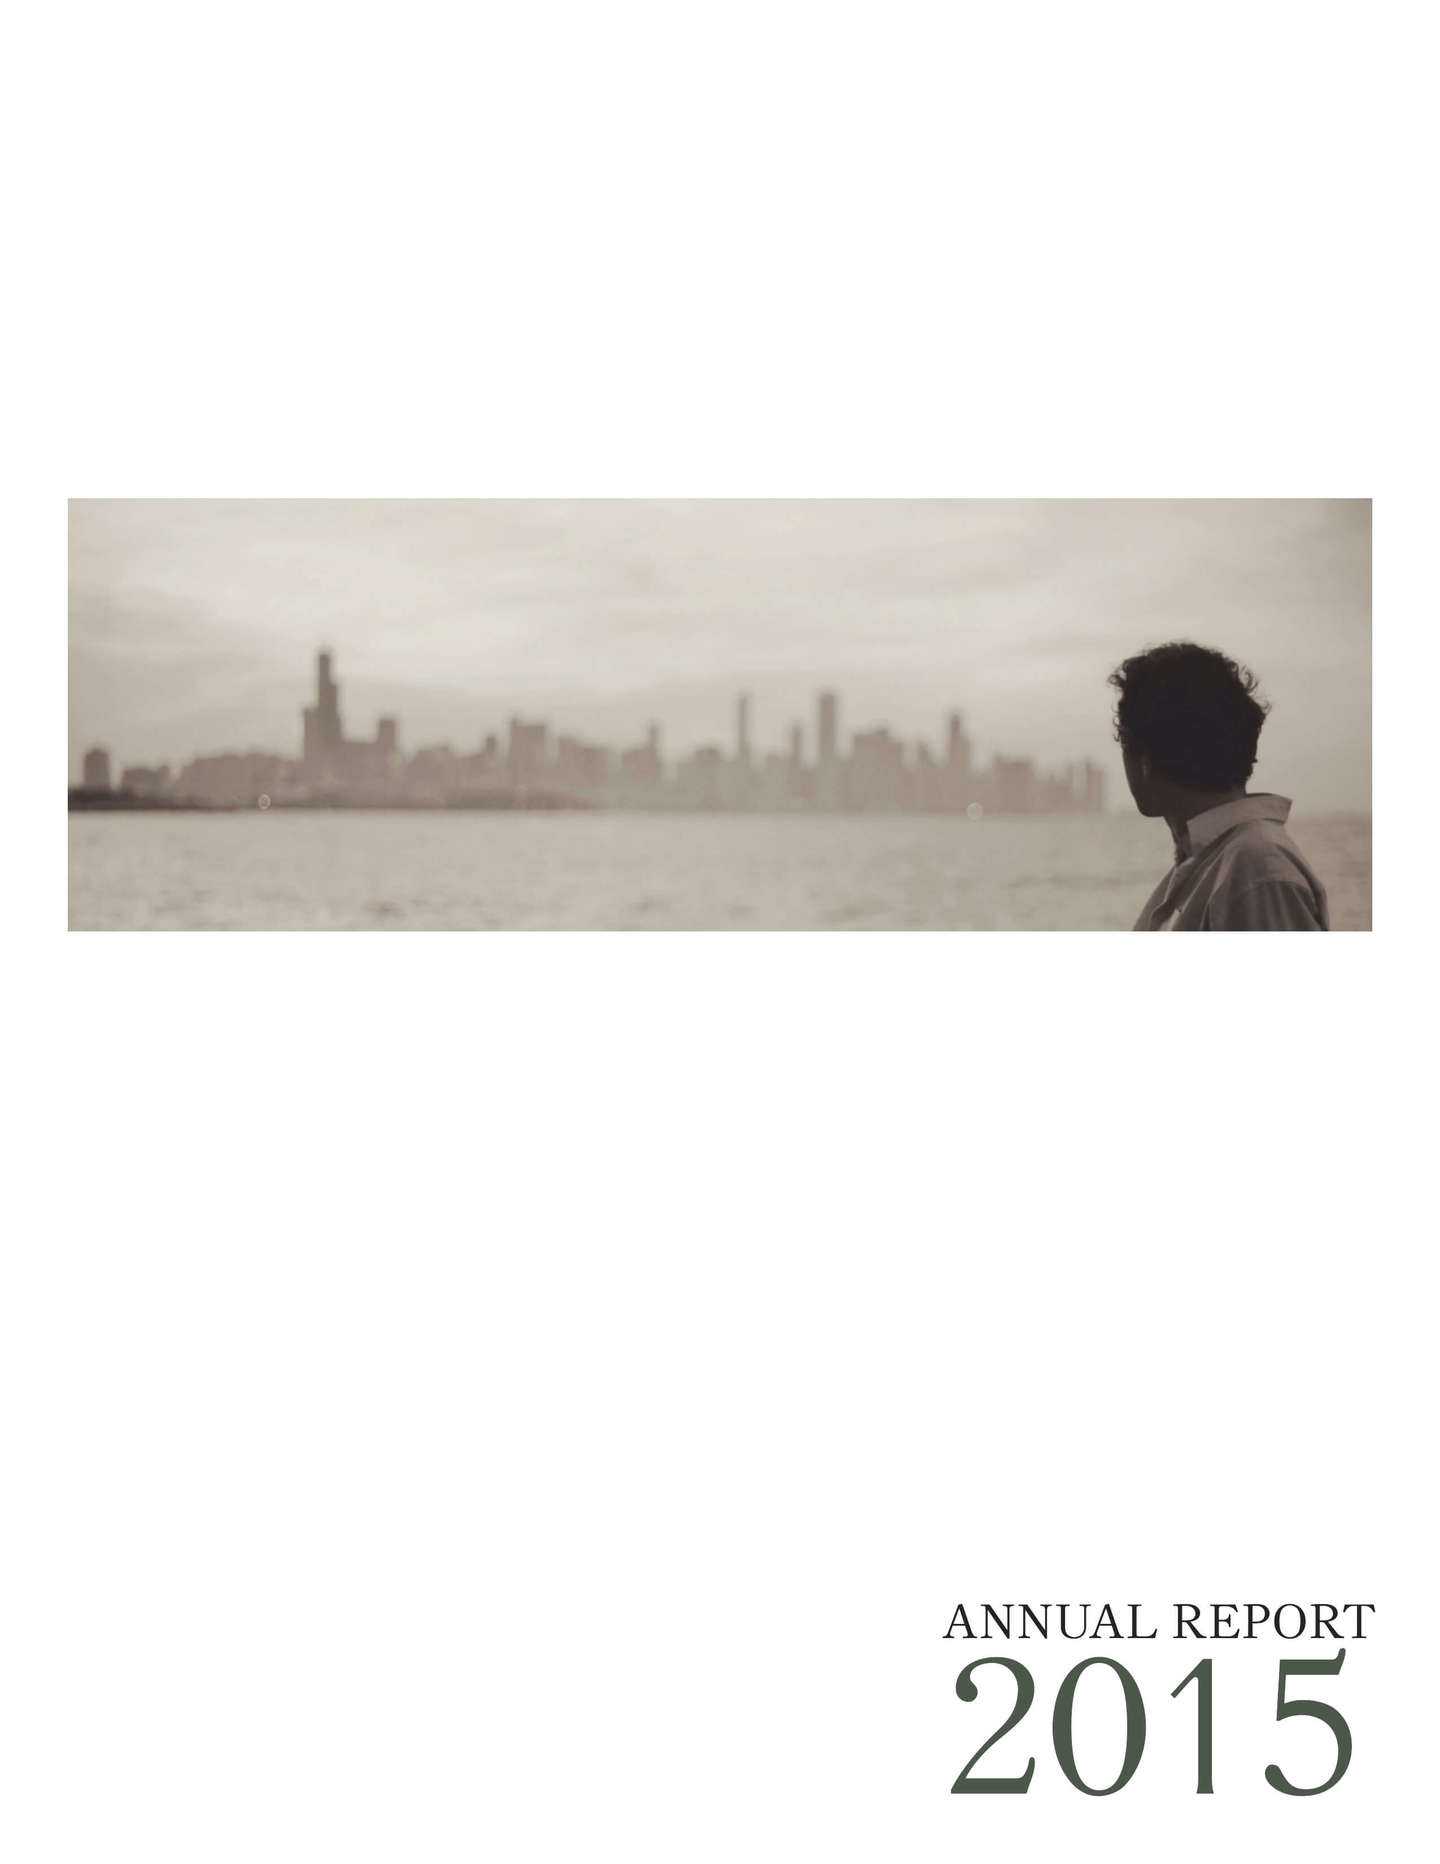 Free Annual Report Templates & Examples [6 Free Templates] Within Llc Annual Report Template